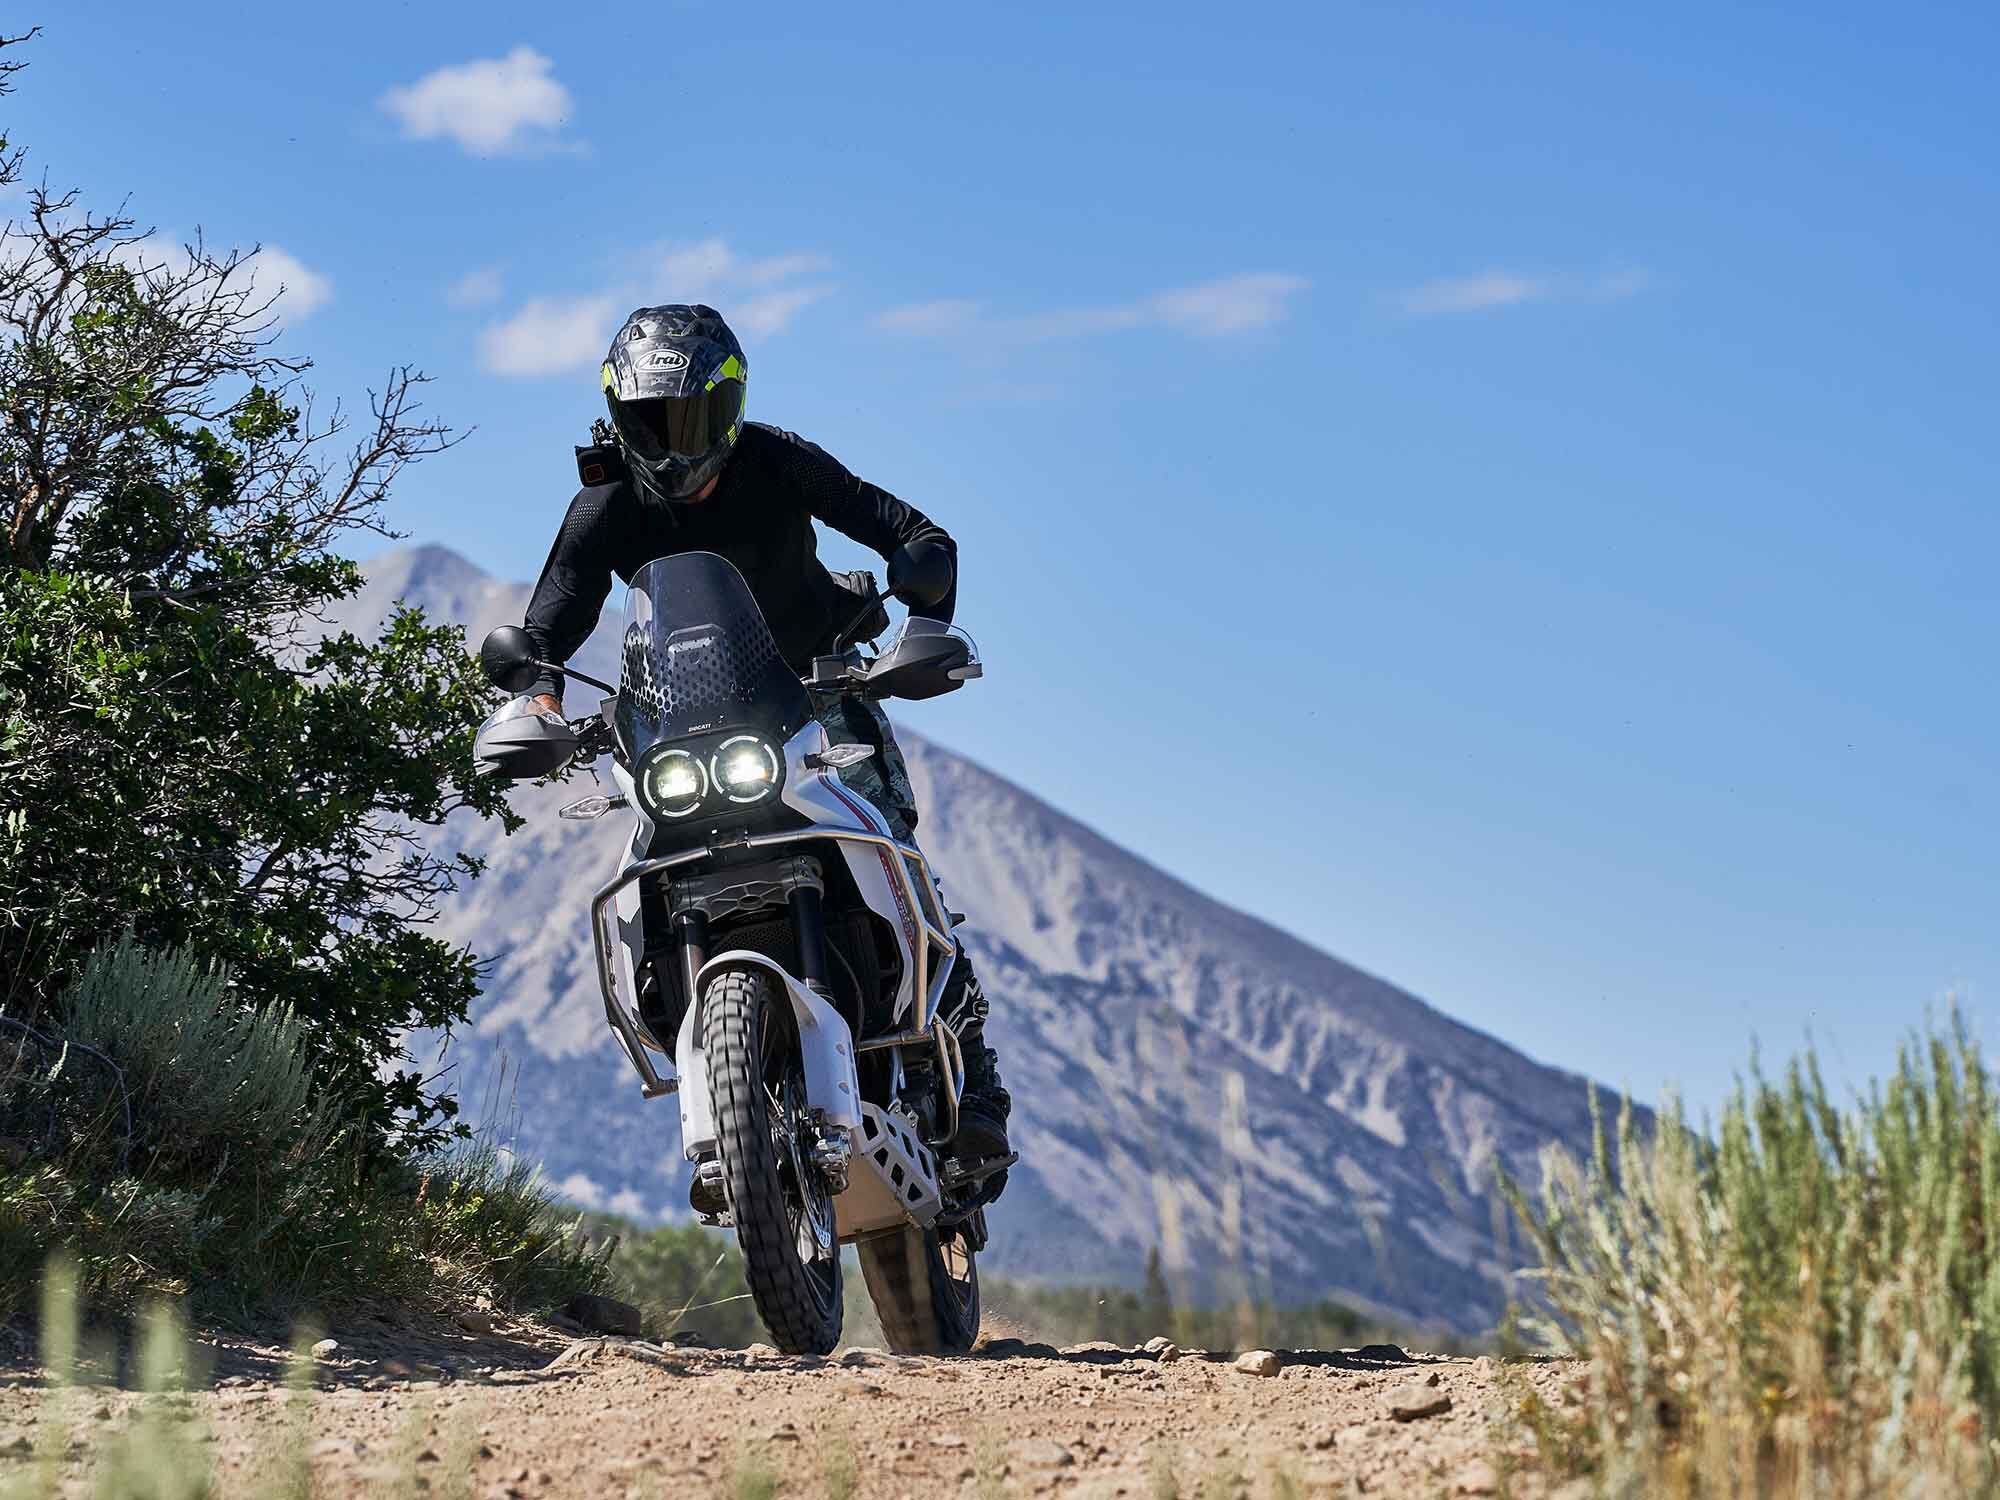 Ducati enters the middleweight adventure bike segment with its capable DesertX.